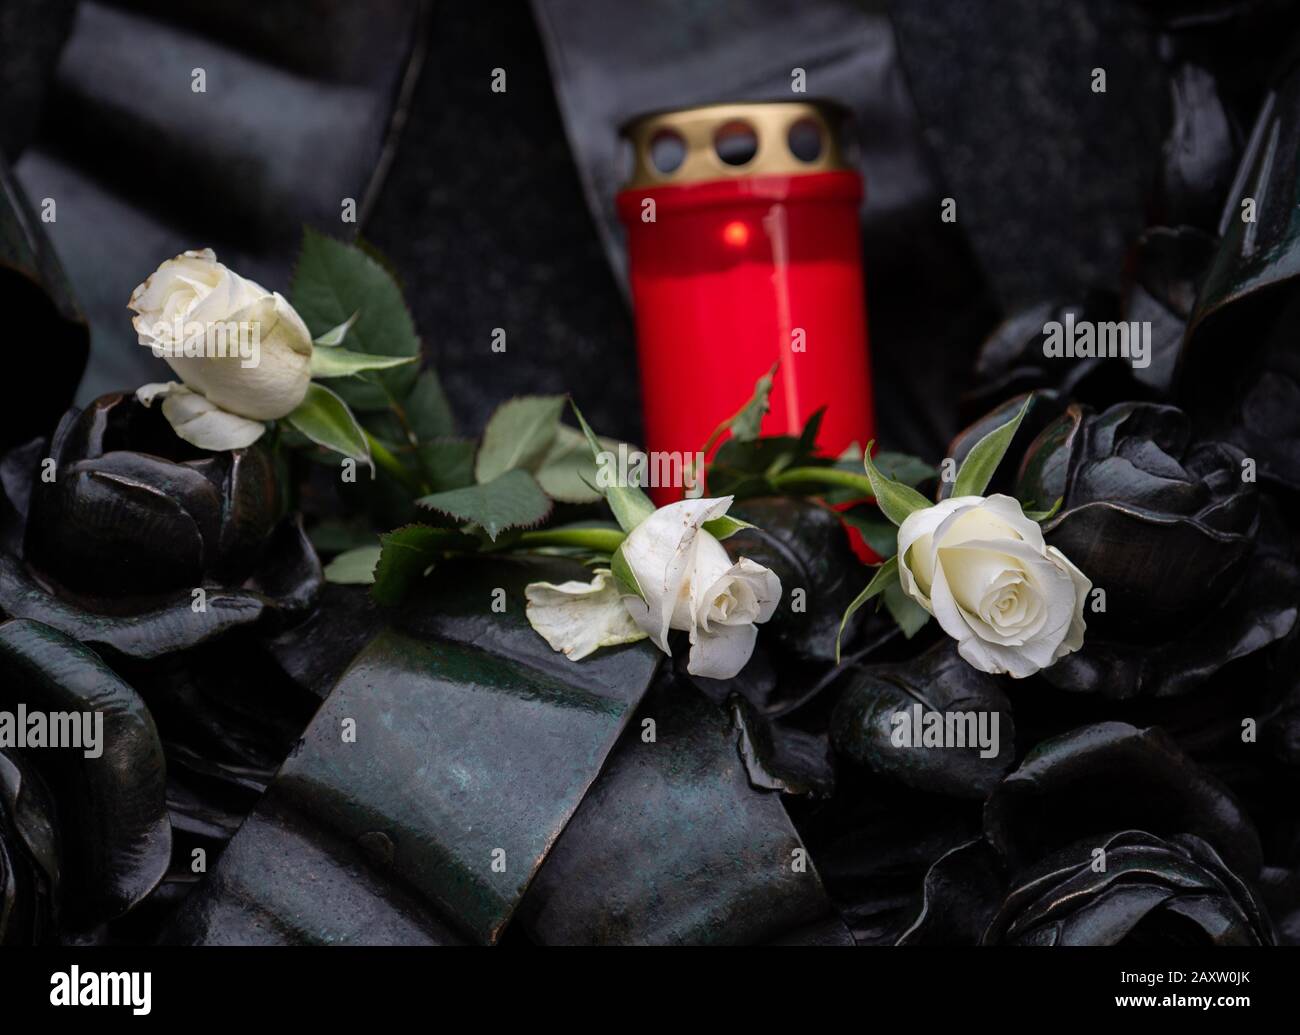 Ashes Of Roses High Resolution Stock Photography and Images - Alamy